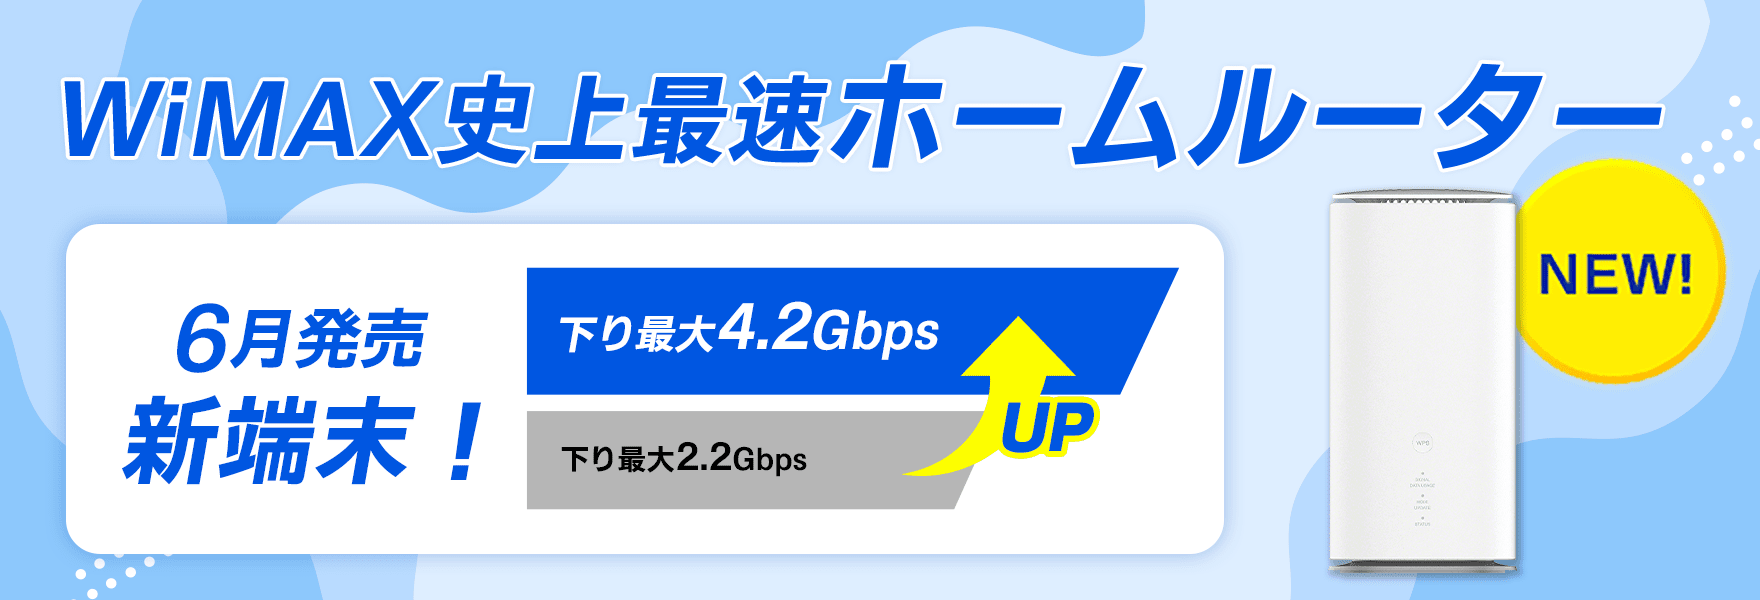 WiMAX史上最速ホームルーター